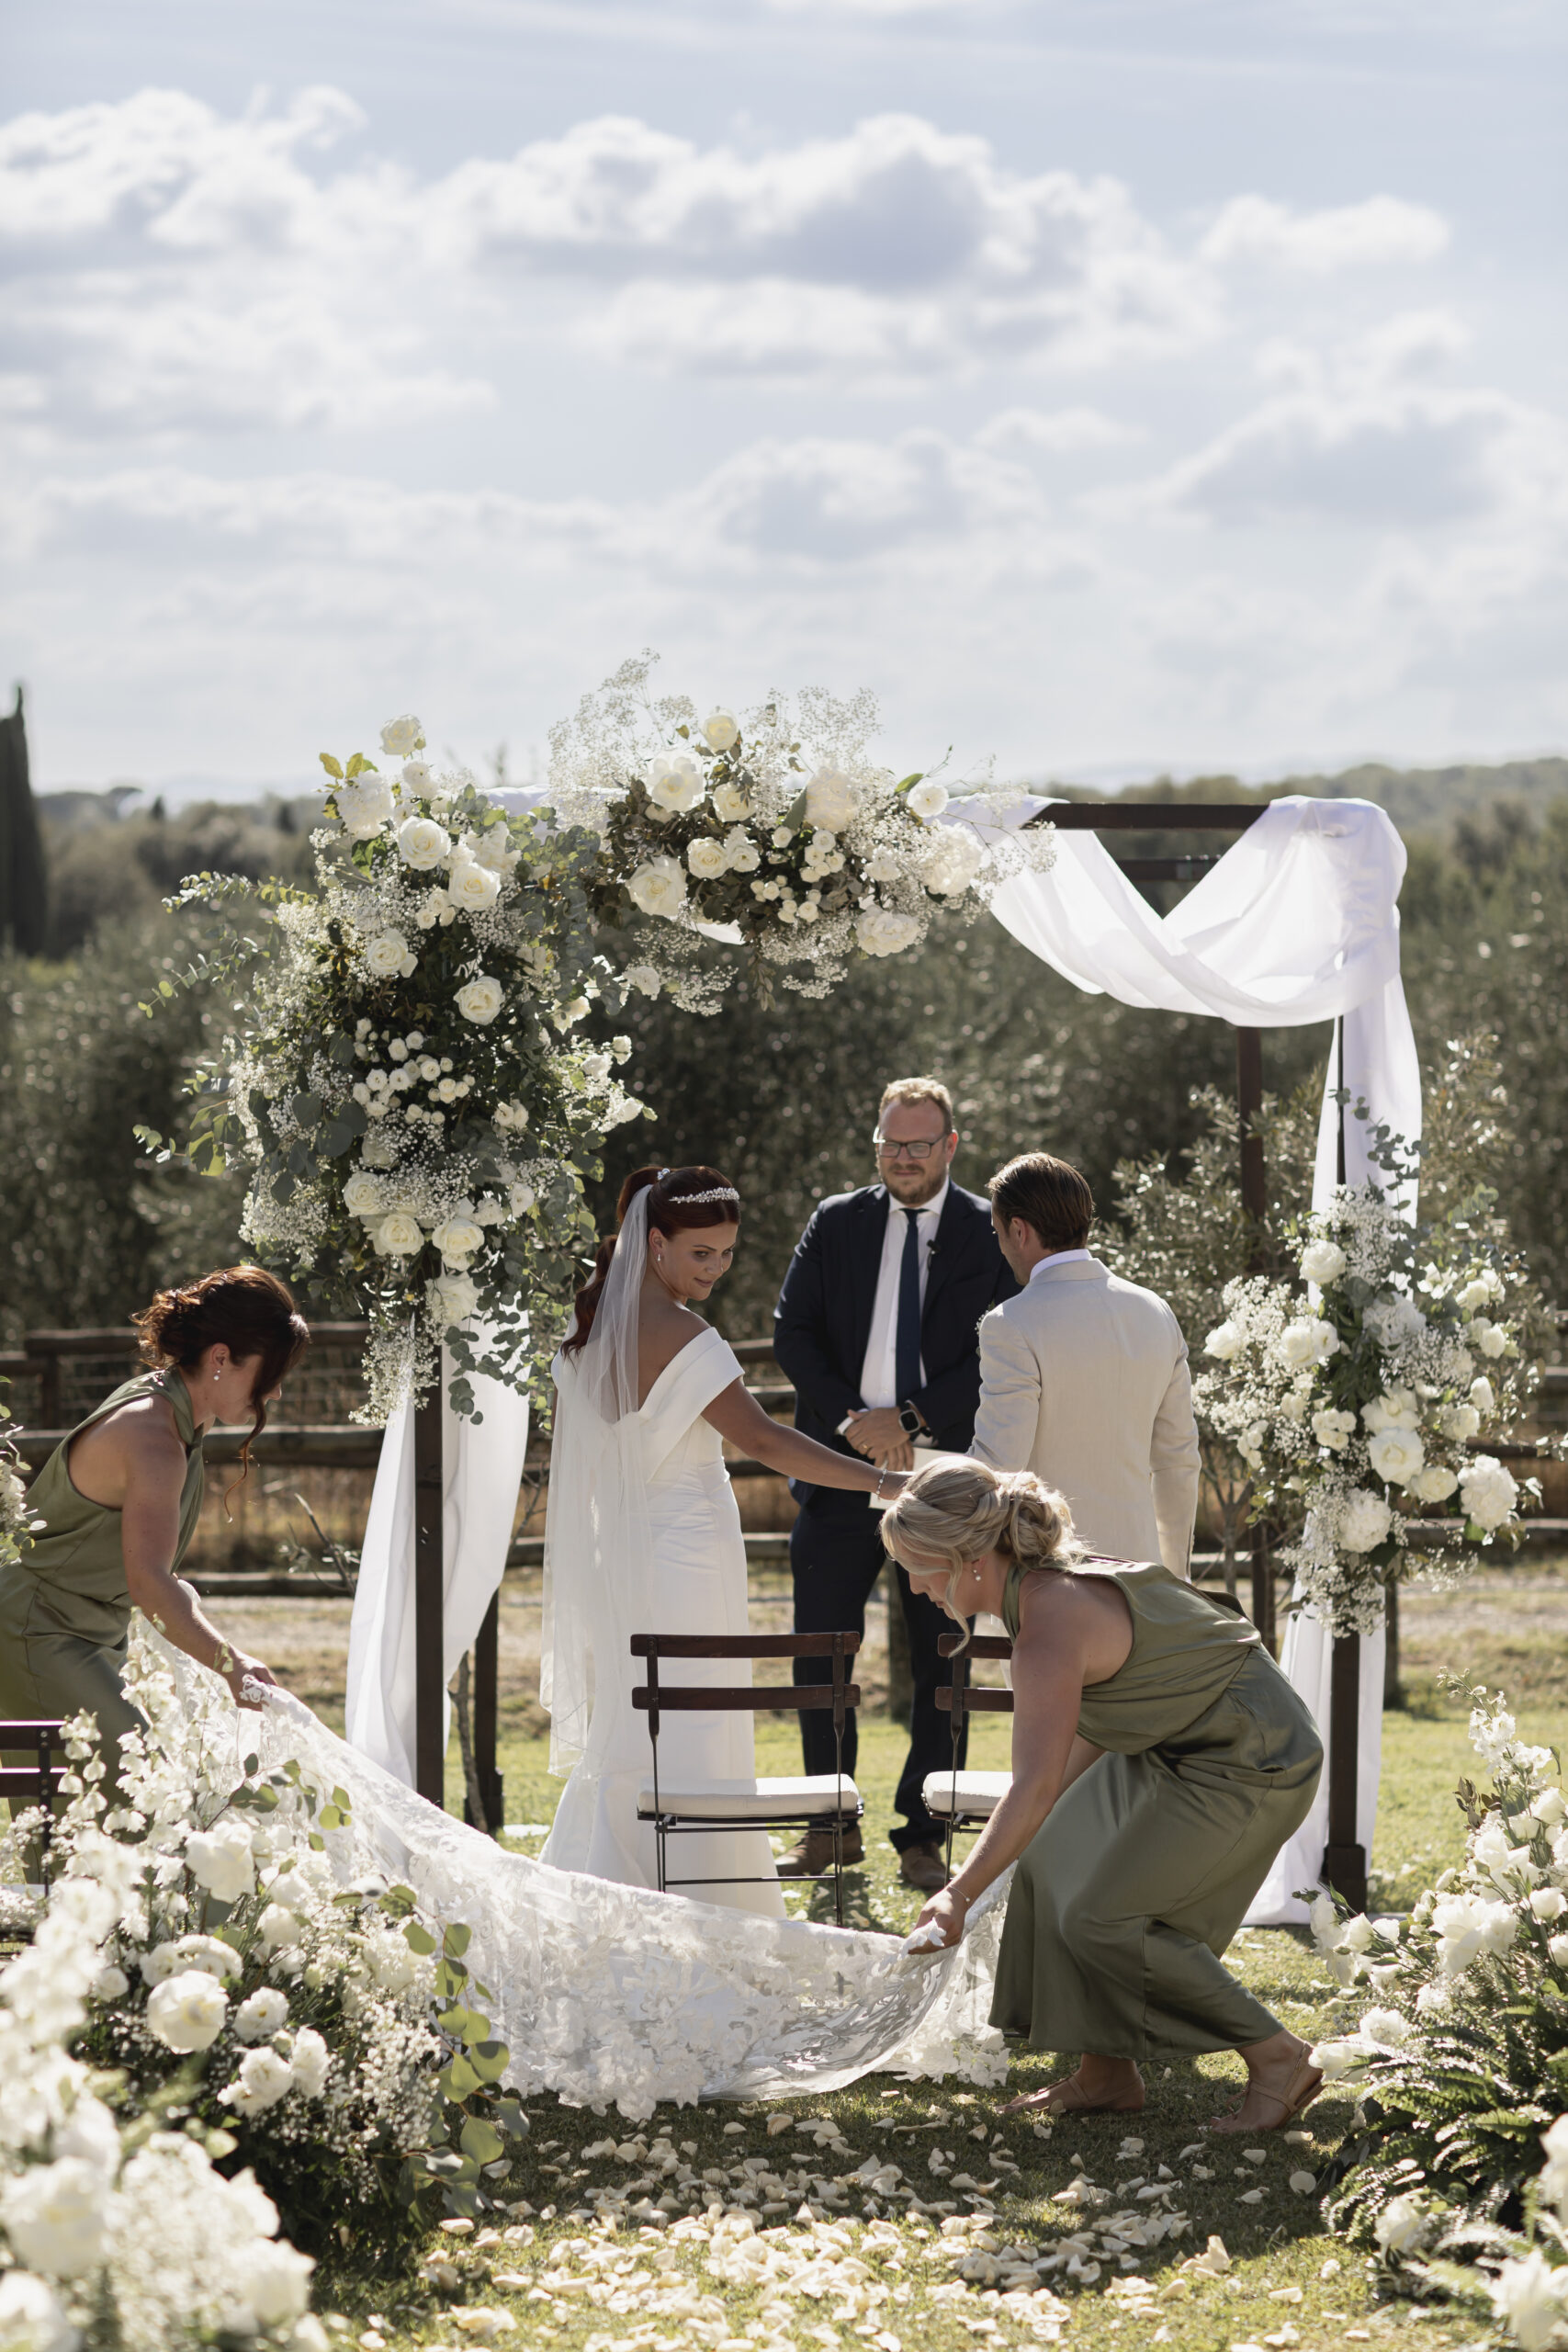 How to find the perfect Italian wedding planner: the definitive guide